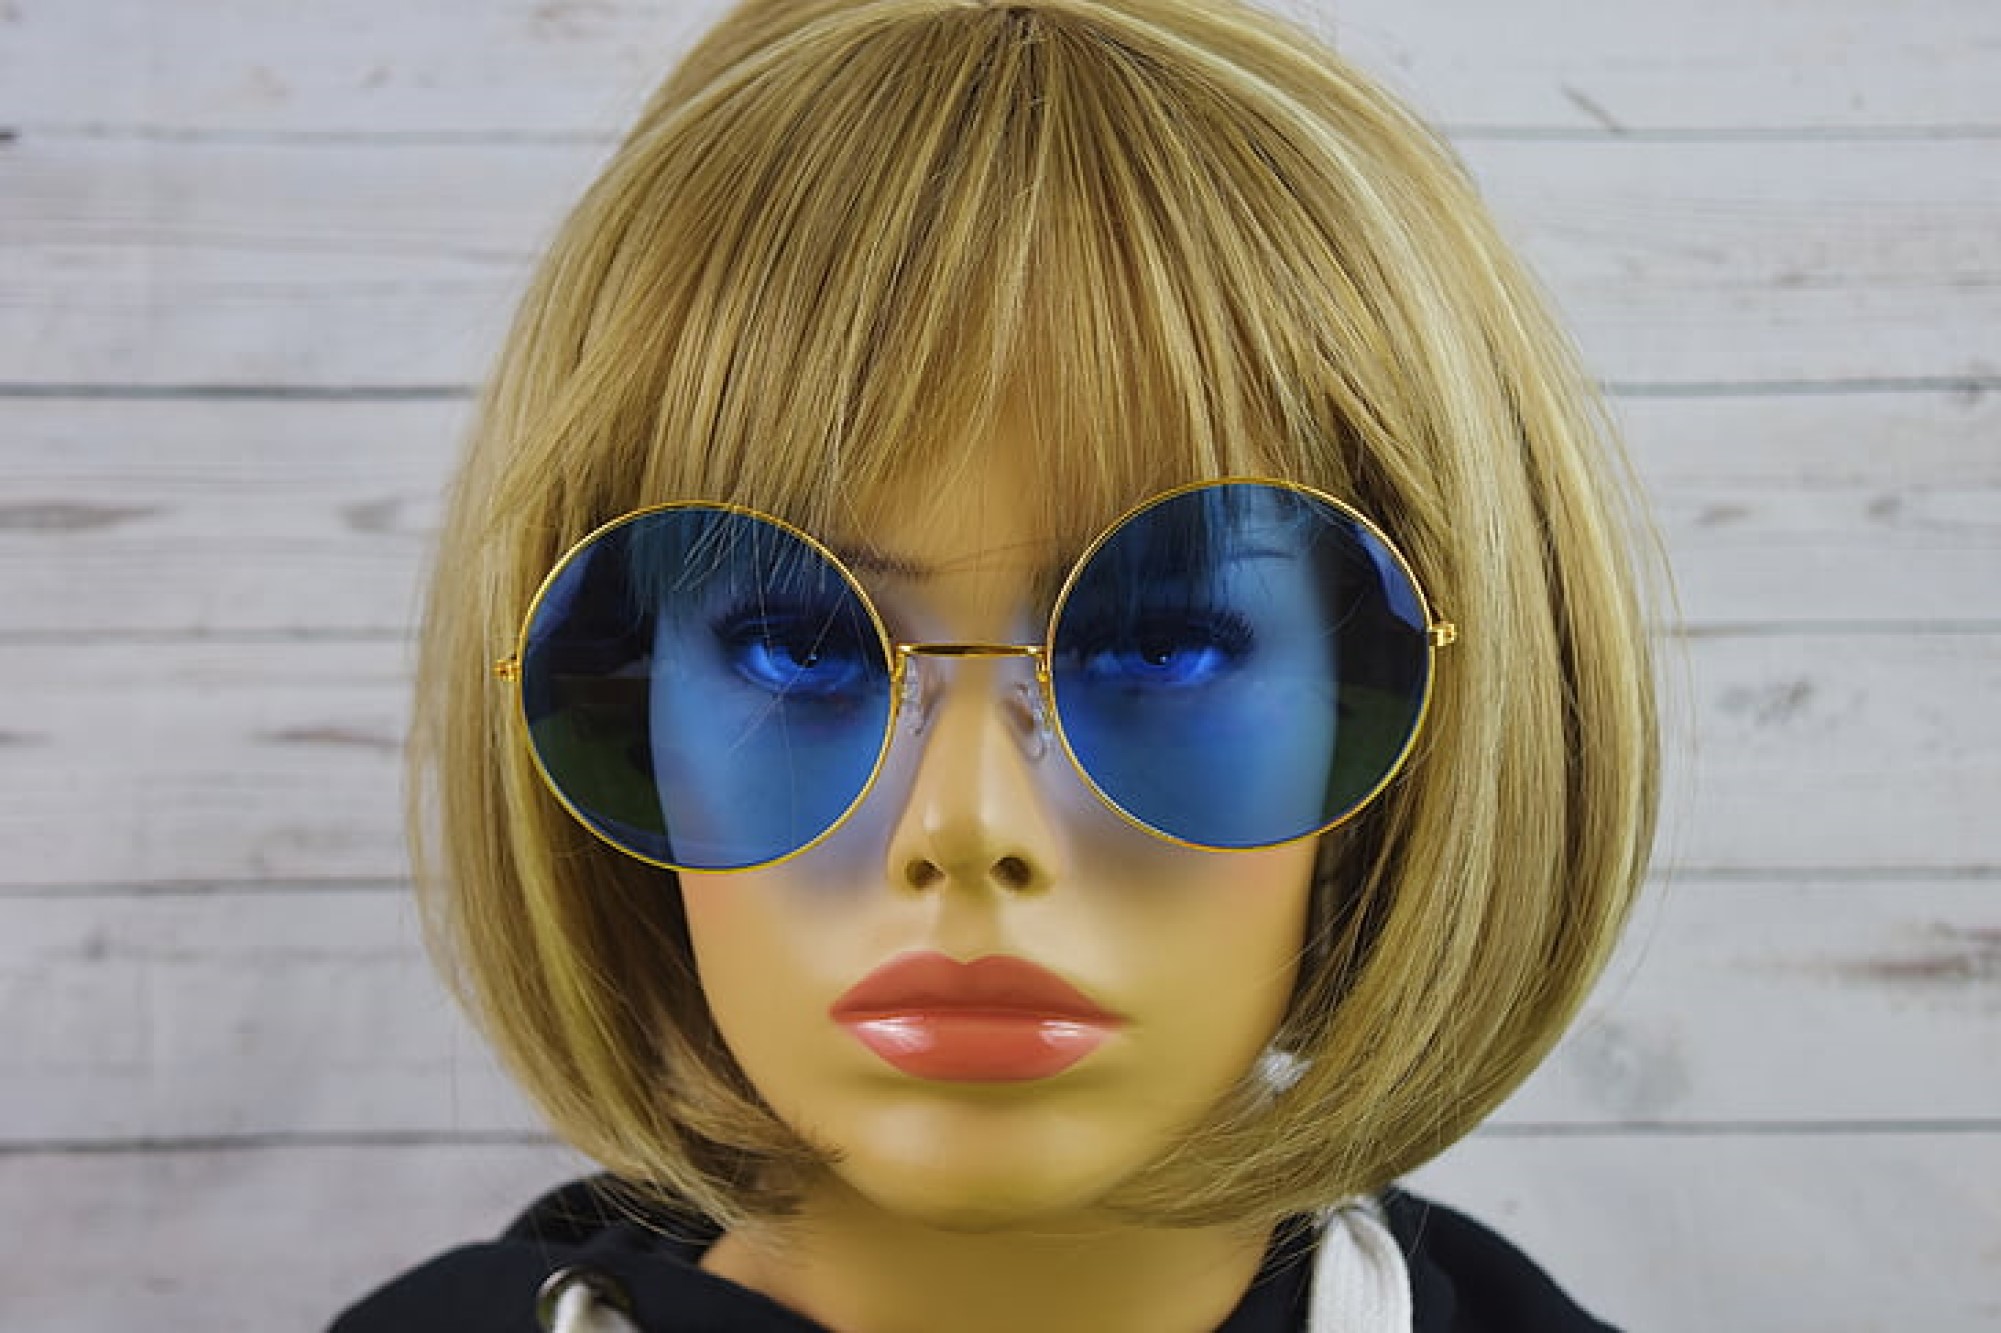 photograph of mannequin in sunglasses and wig